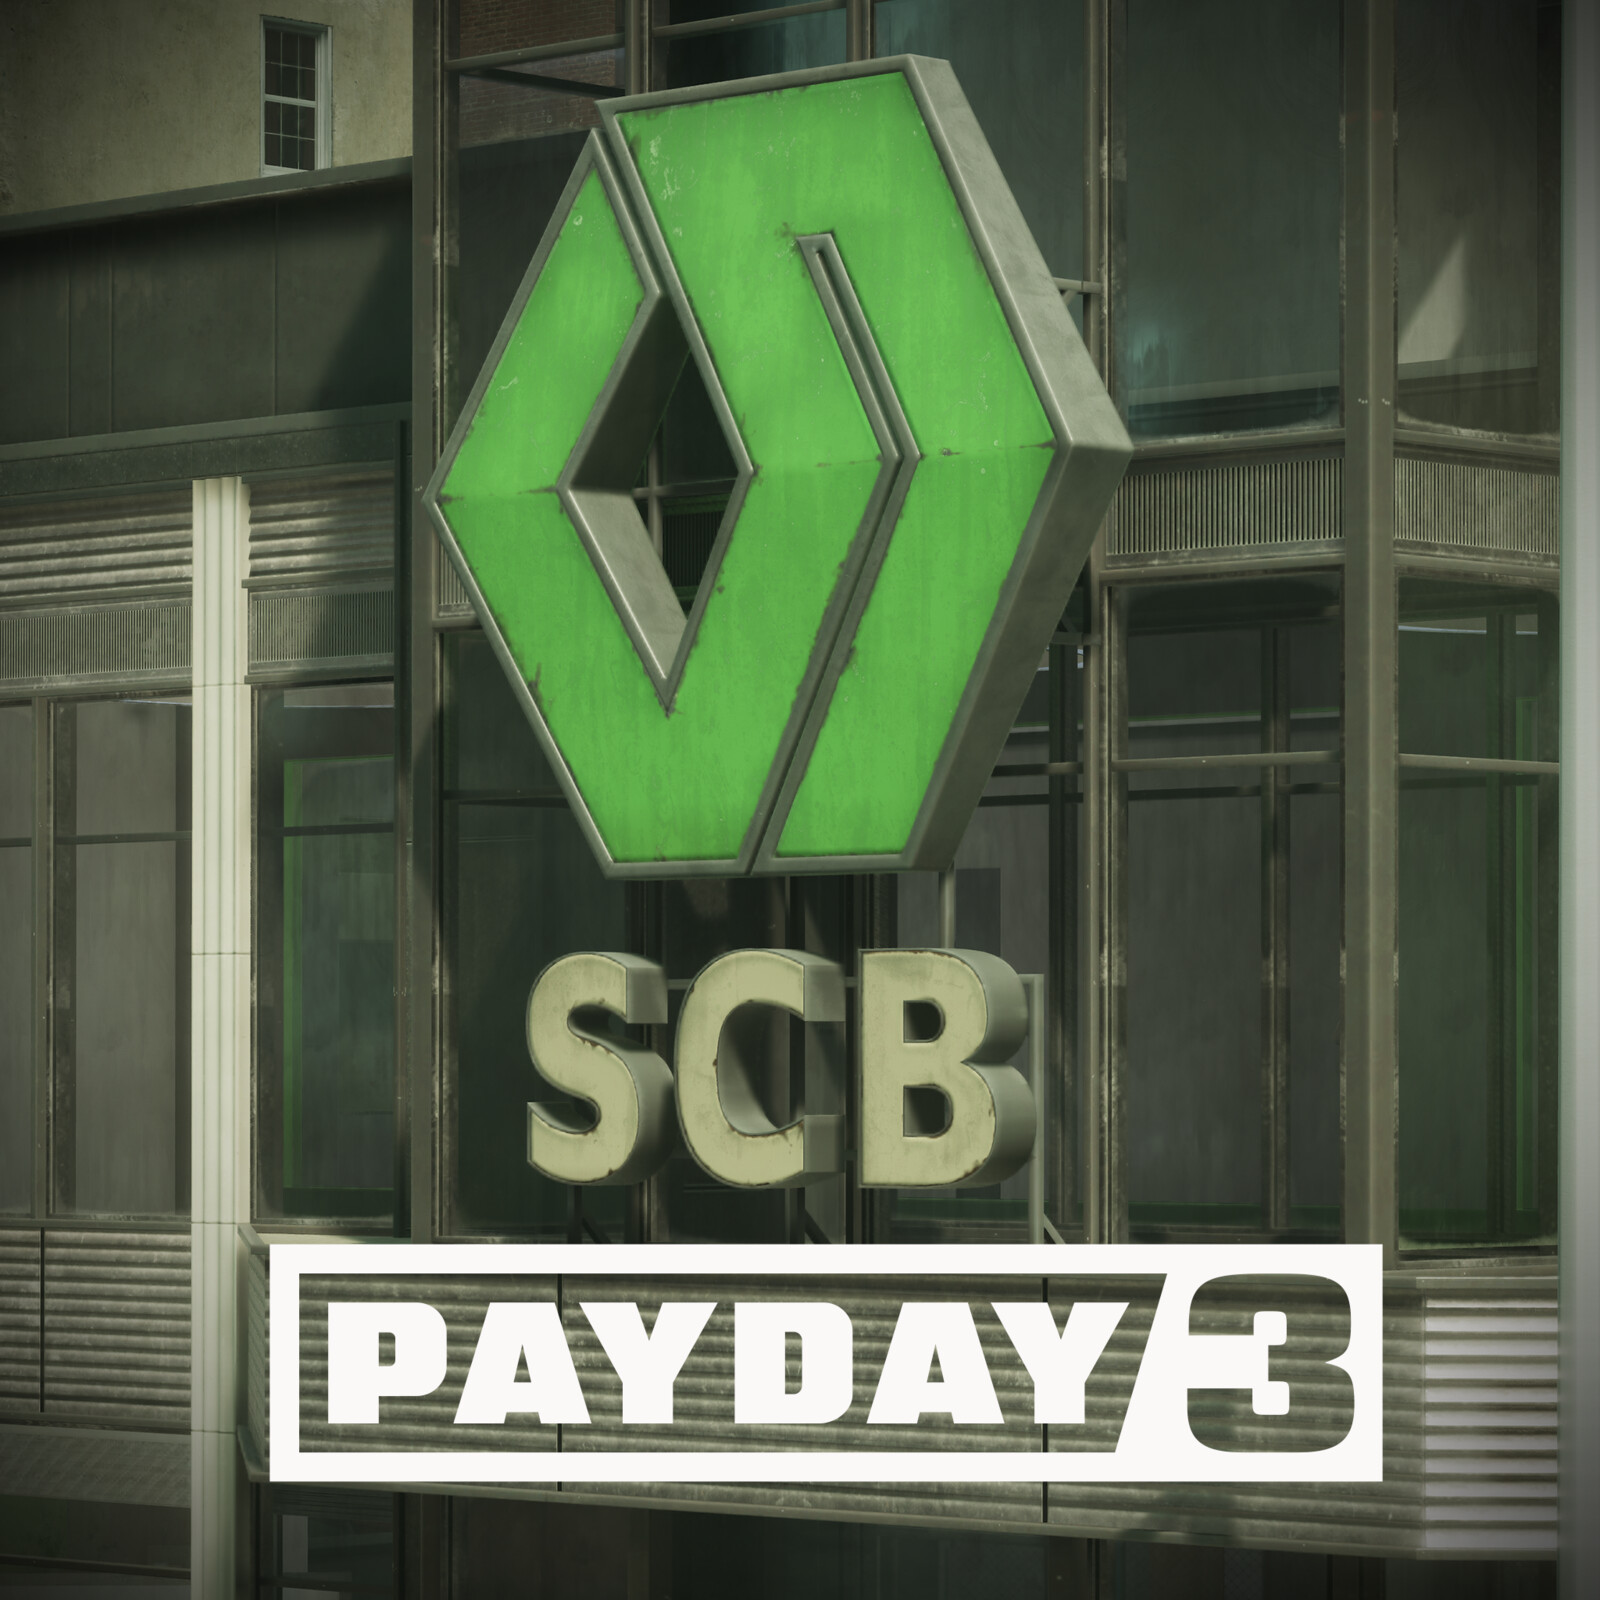 Payday 3 - No rest for the wicked